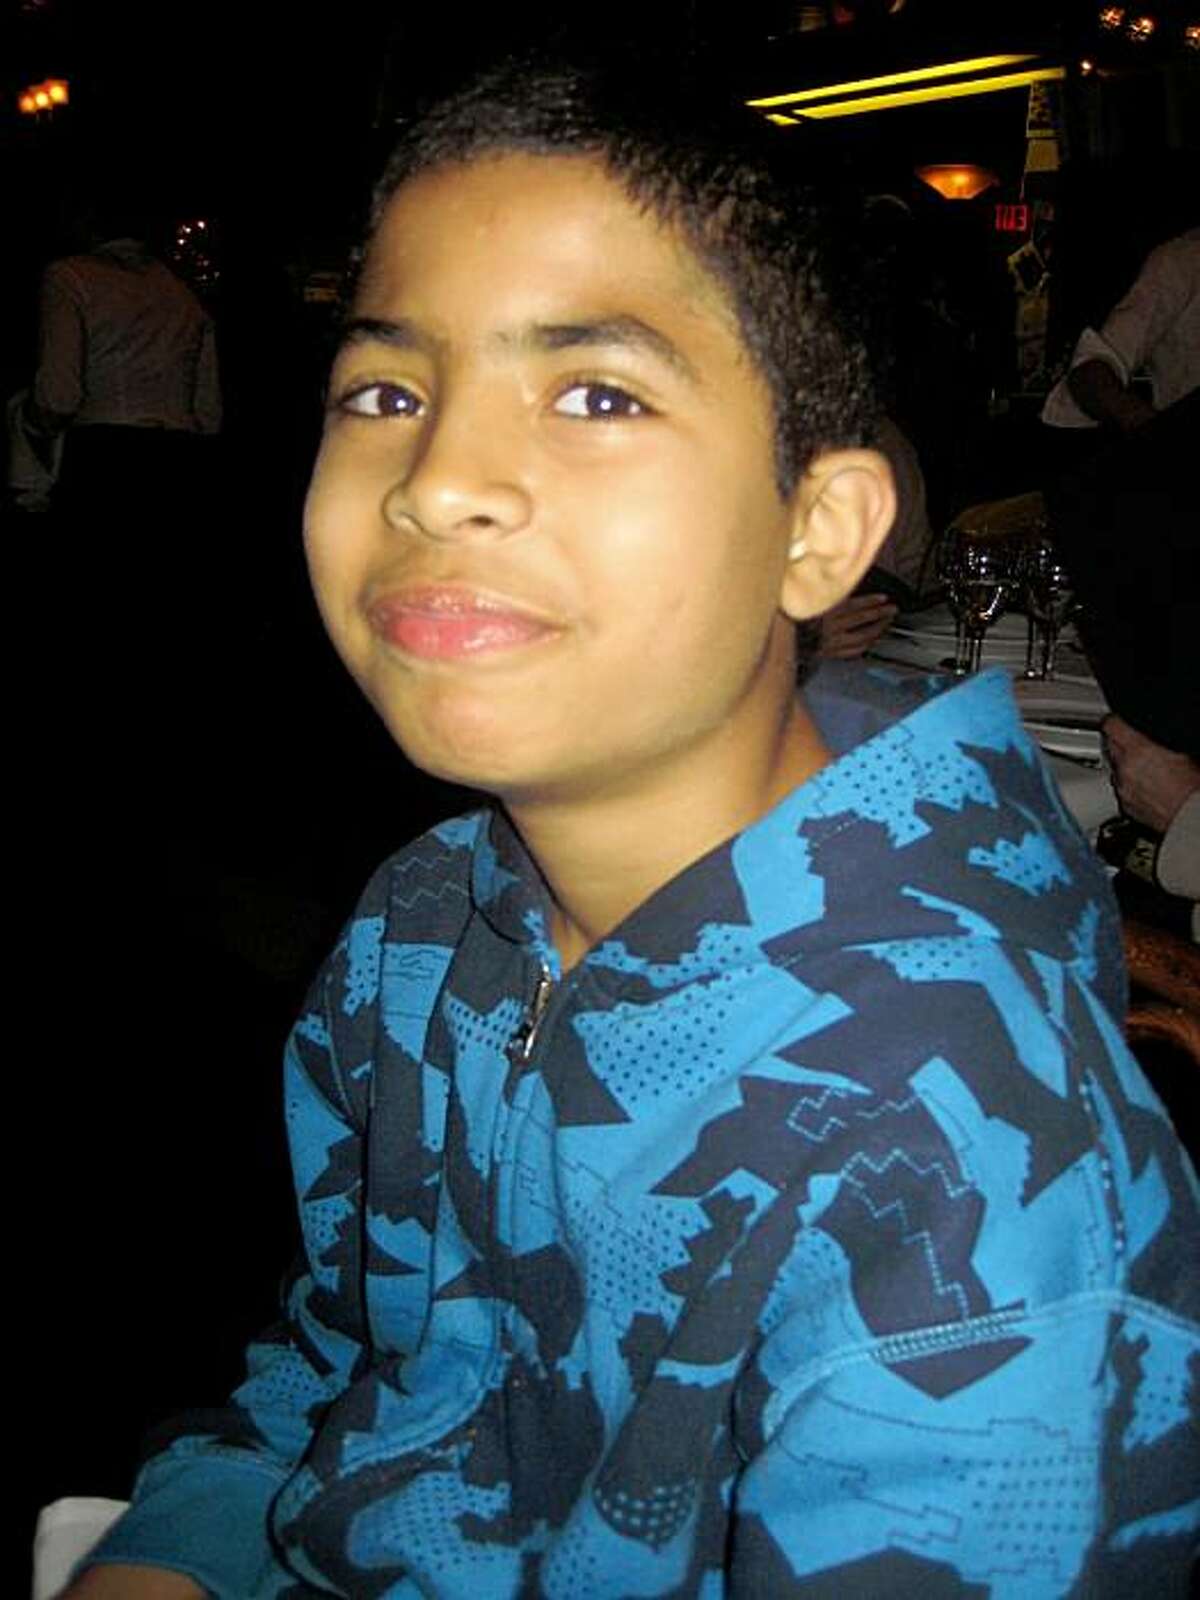 Hatim Mansori, 11, was stabbed coming home from baseball practice on a Muni bus. It was his first ride alone on Muni.